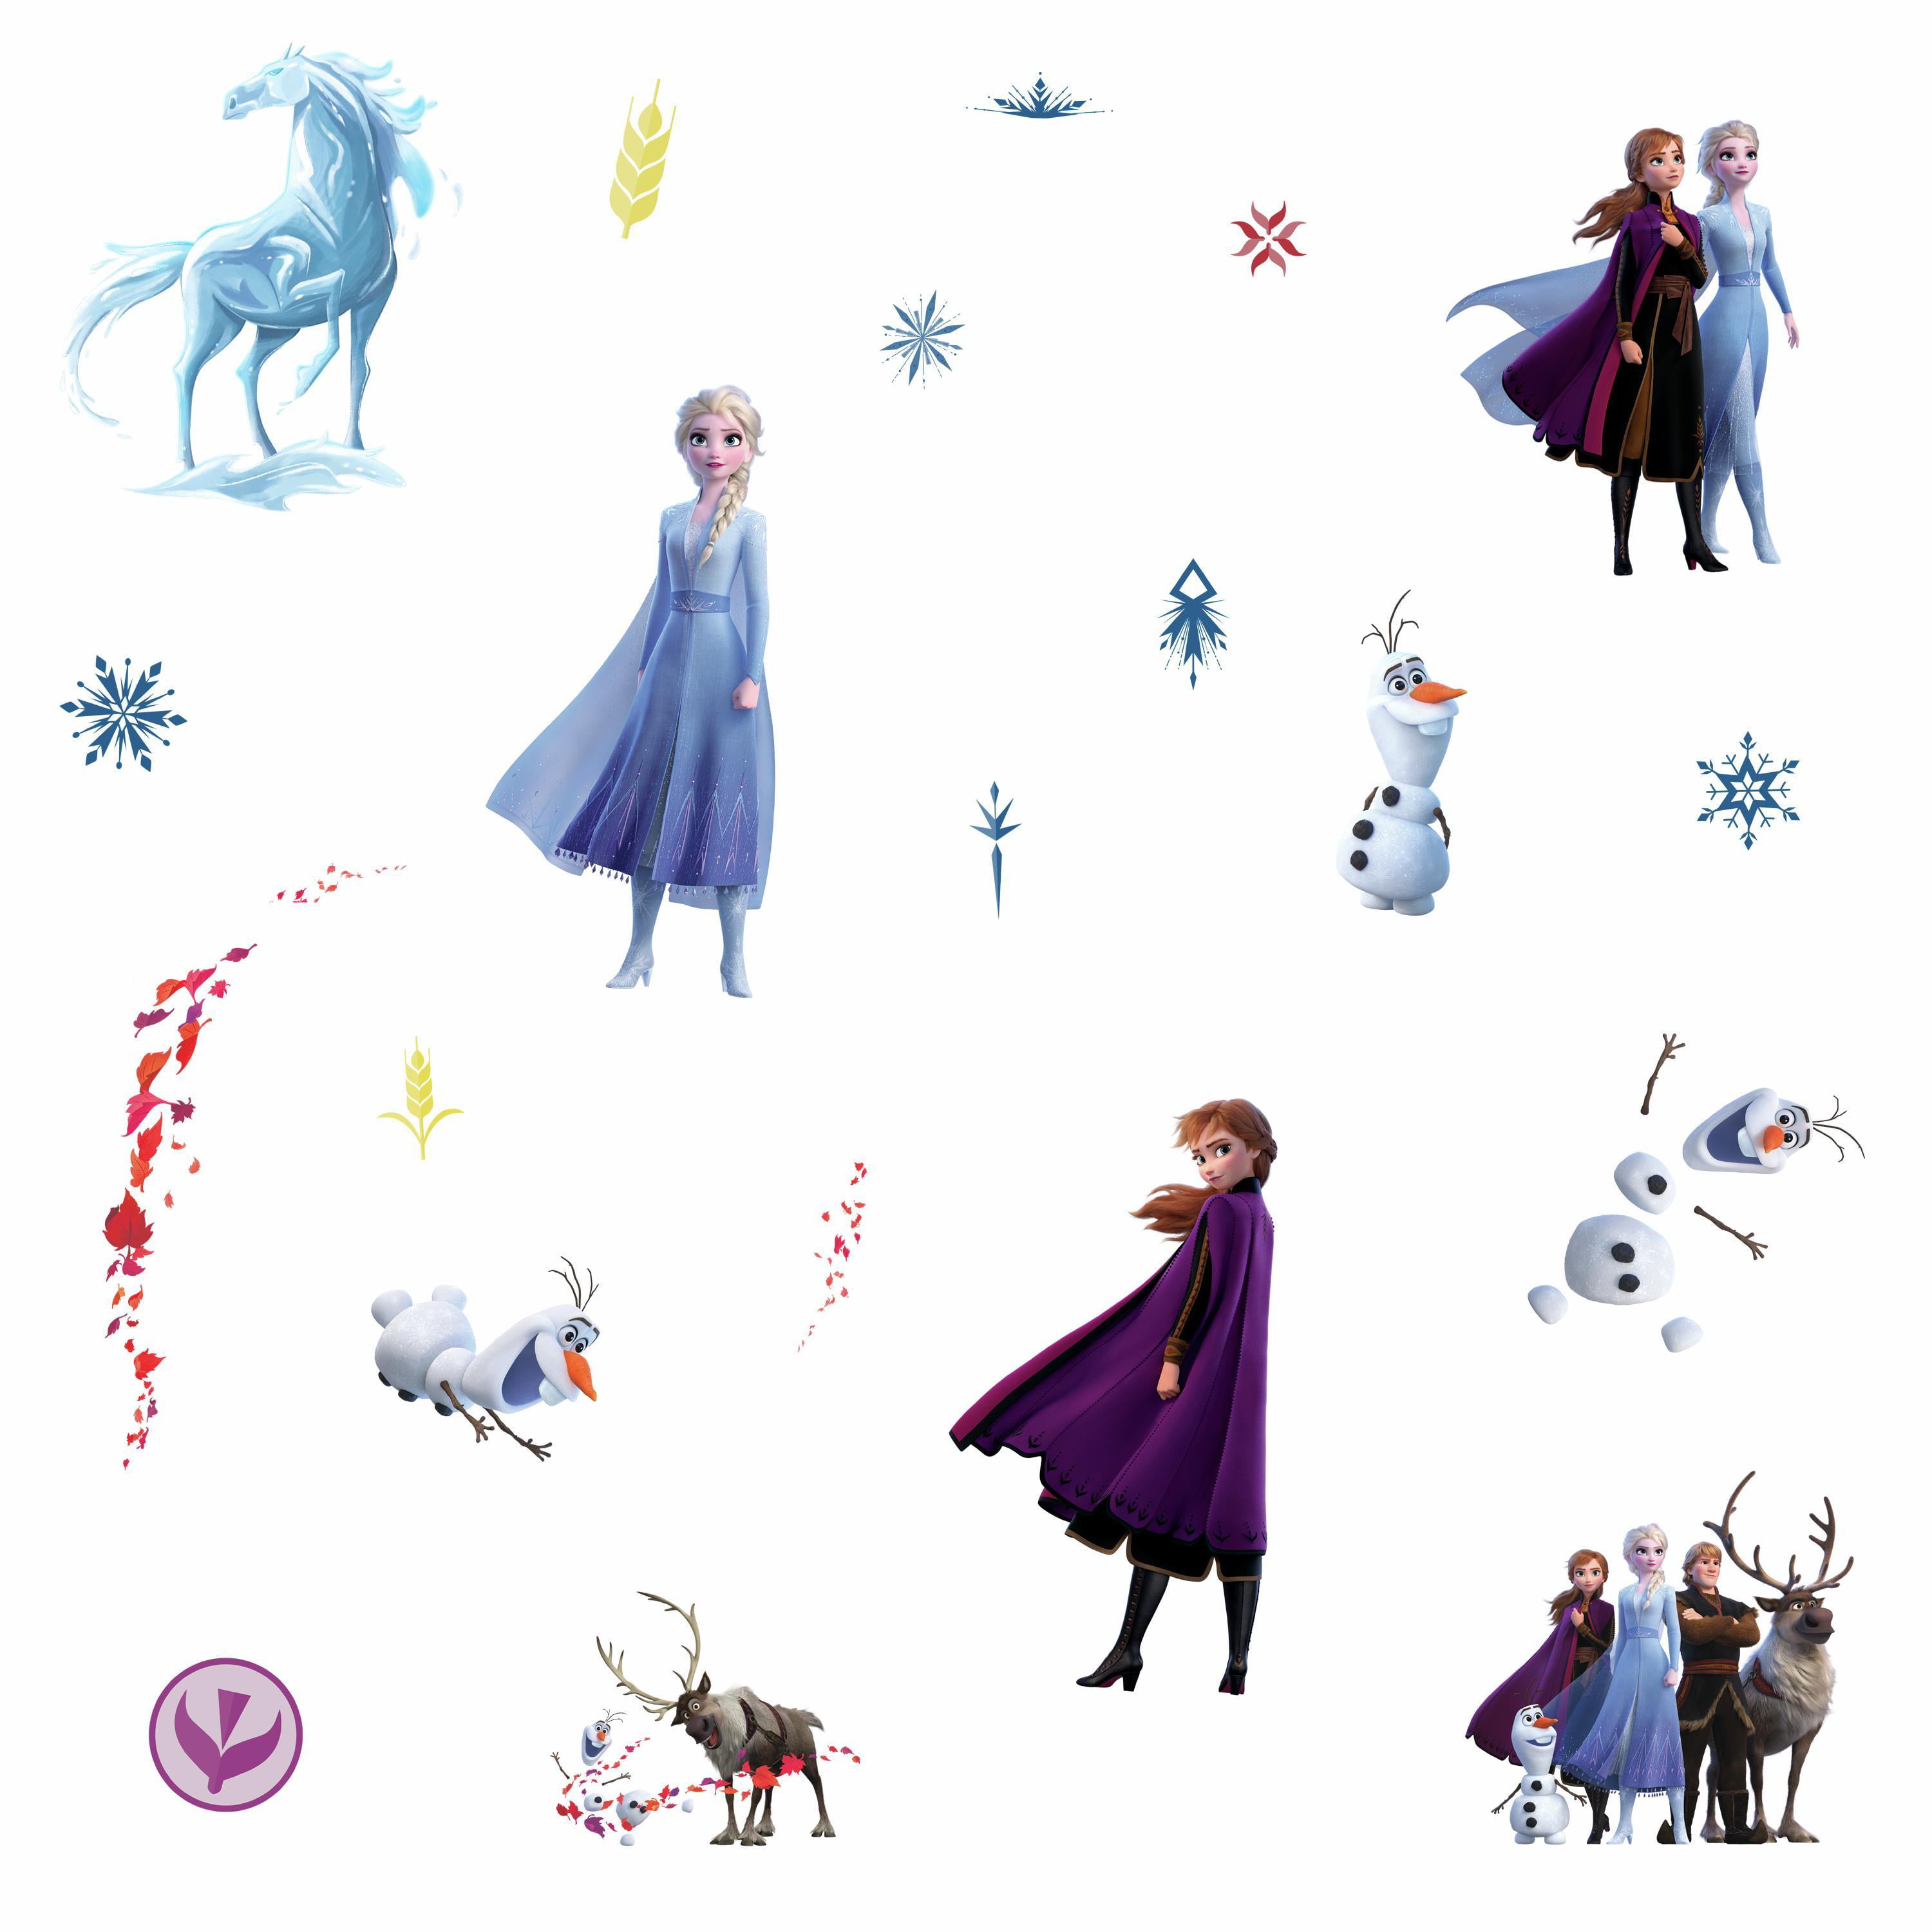 great for any room ELSA FROZEN II WALL ART STICKERS 3 x great sizes